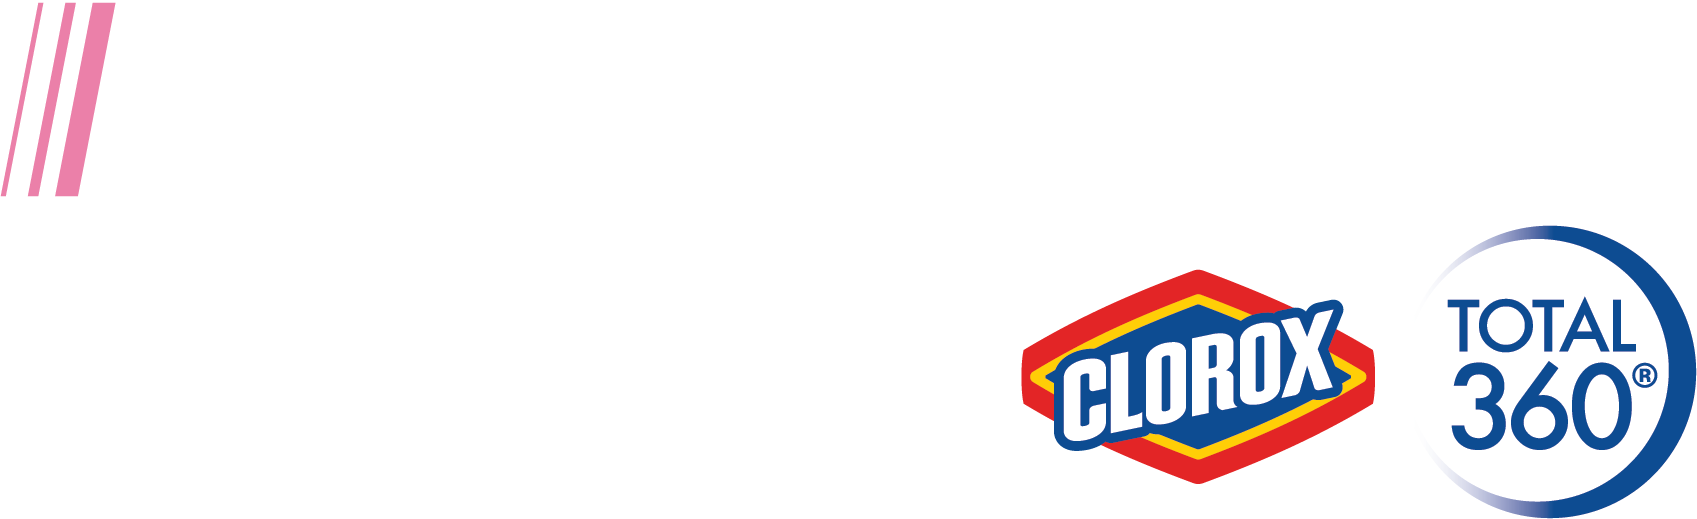 PrecisionCare powered by Clorox® Total 360®